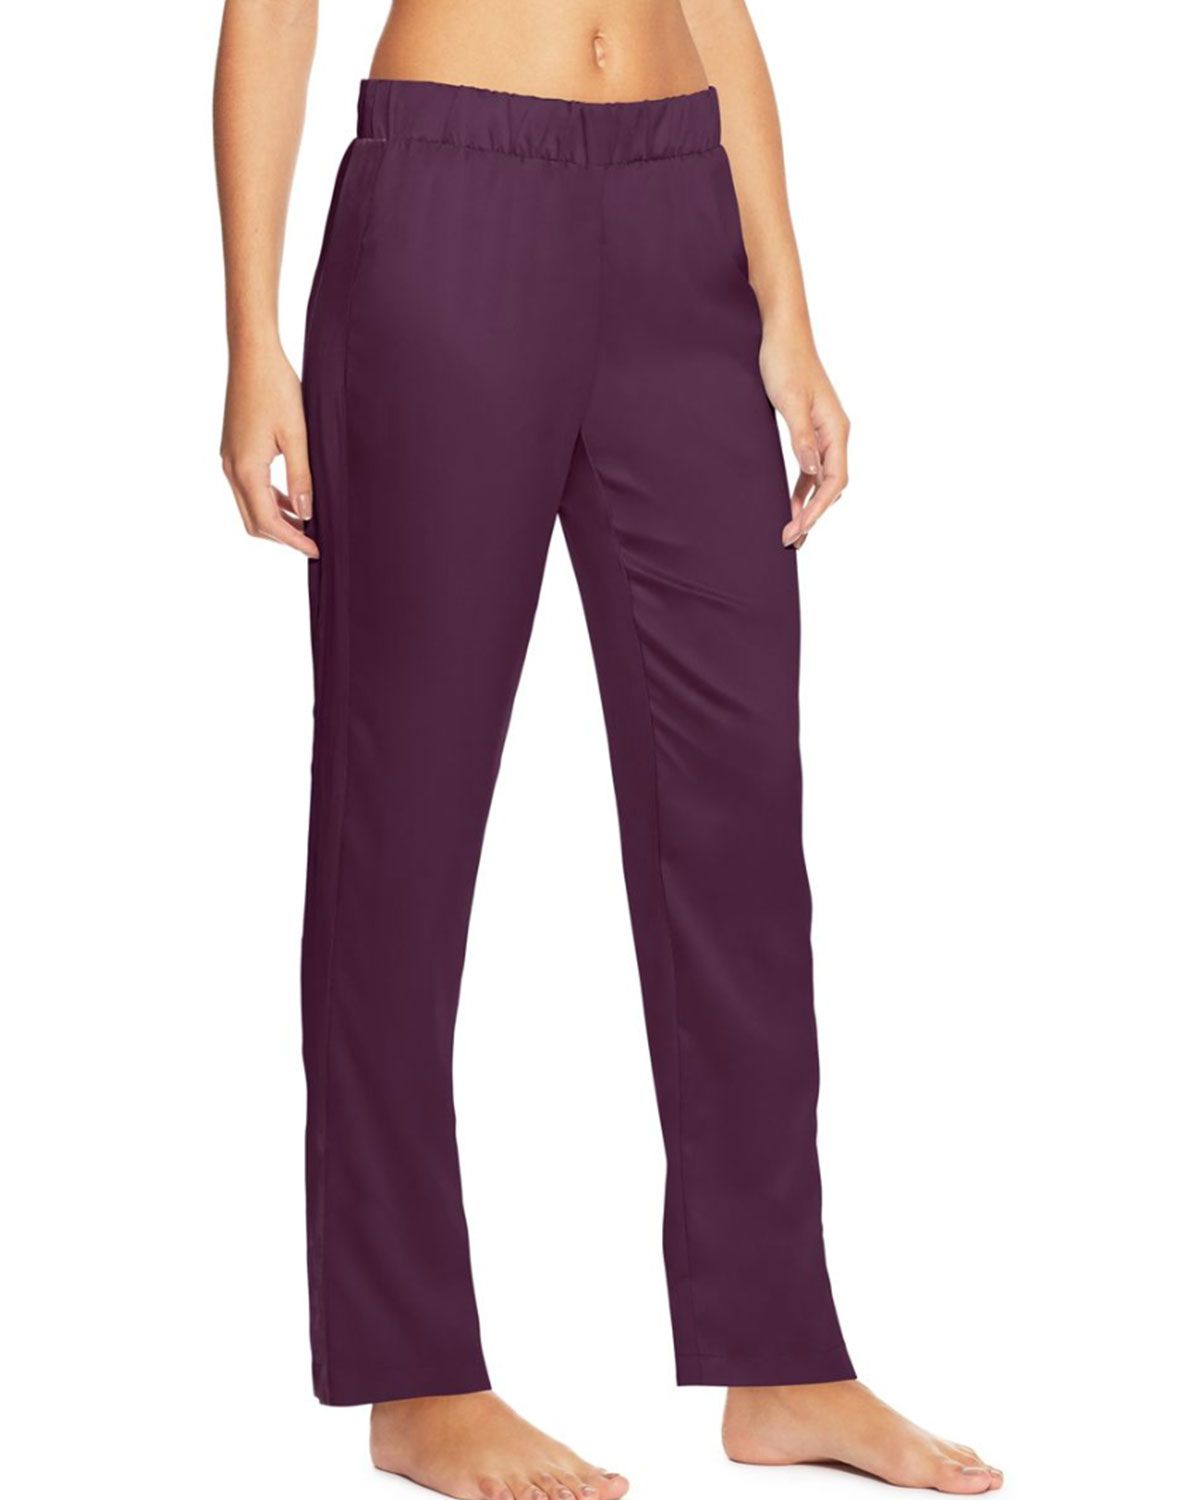 Size Chart for Maidenform MFW7601 Women's Satin Pants